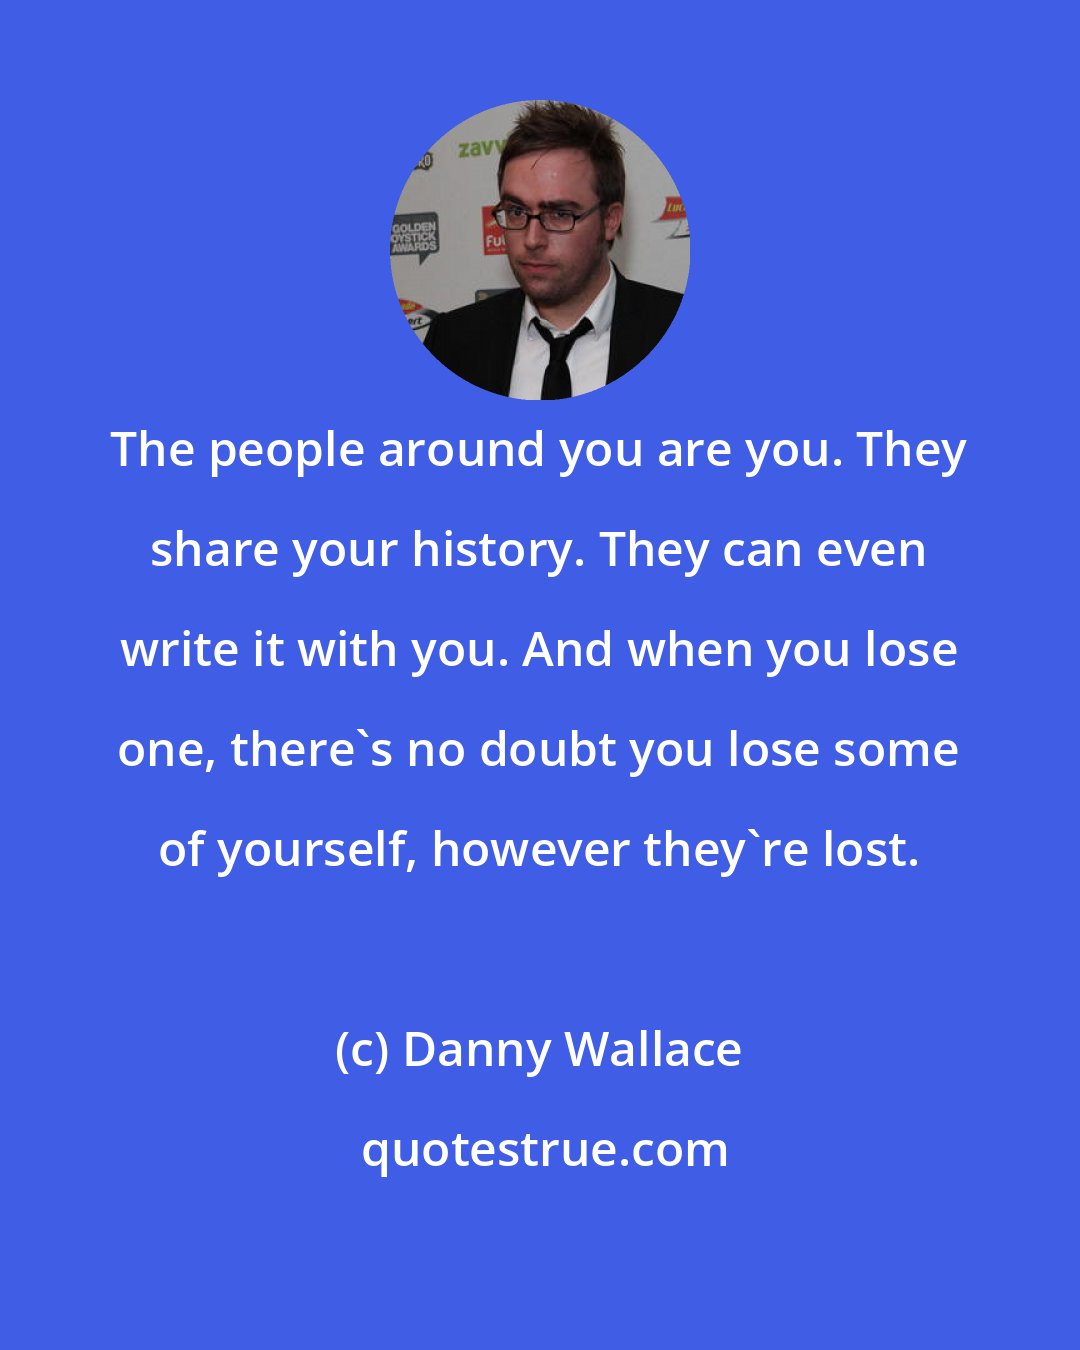 Danny Wallace: The people around you are you. They share your history. They can even write it with you. And when you lose one, there's no doubt you lose some of yourself, however they're lost.